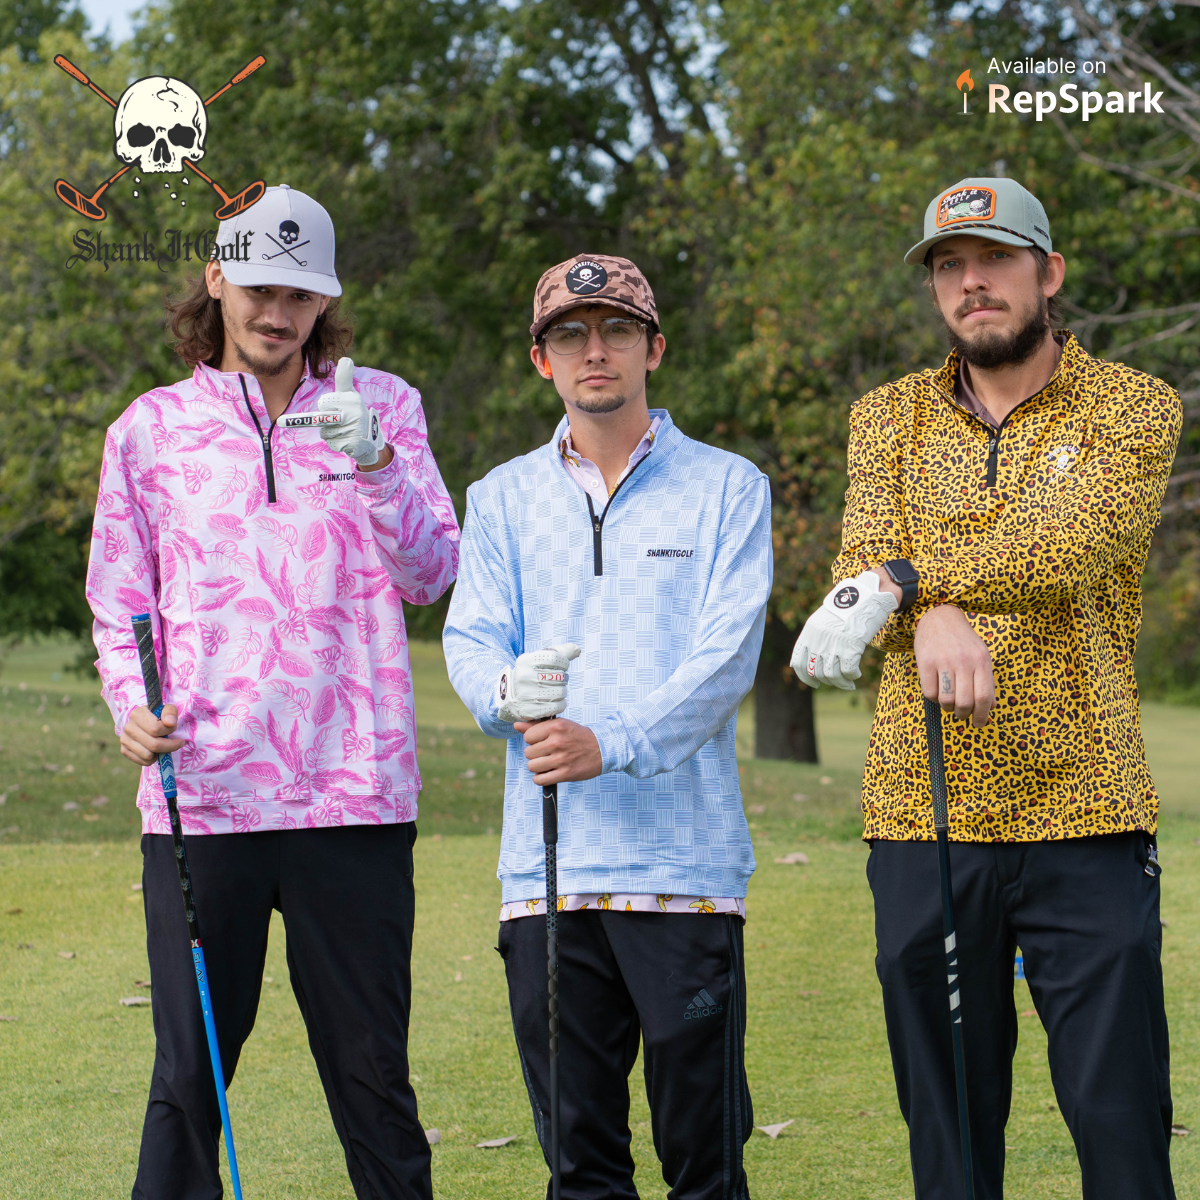 3 male golfers wearing vibrant polos standing with golf clubs in their hands on a golf course.